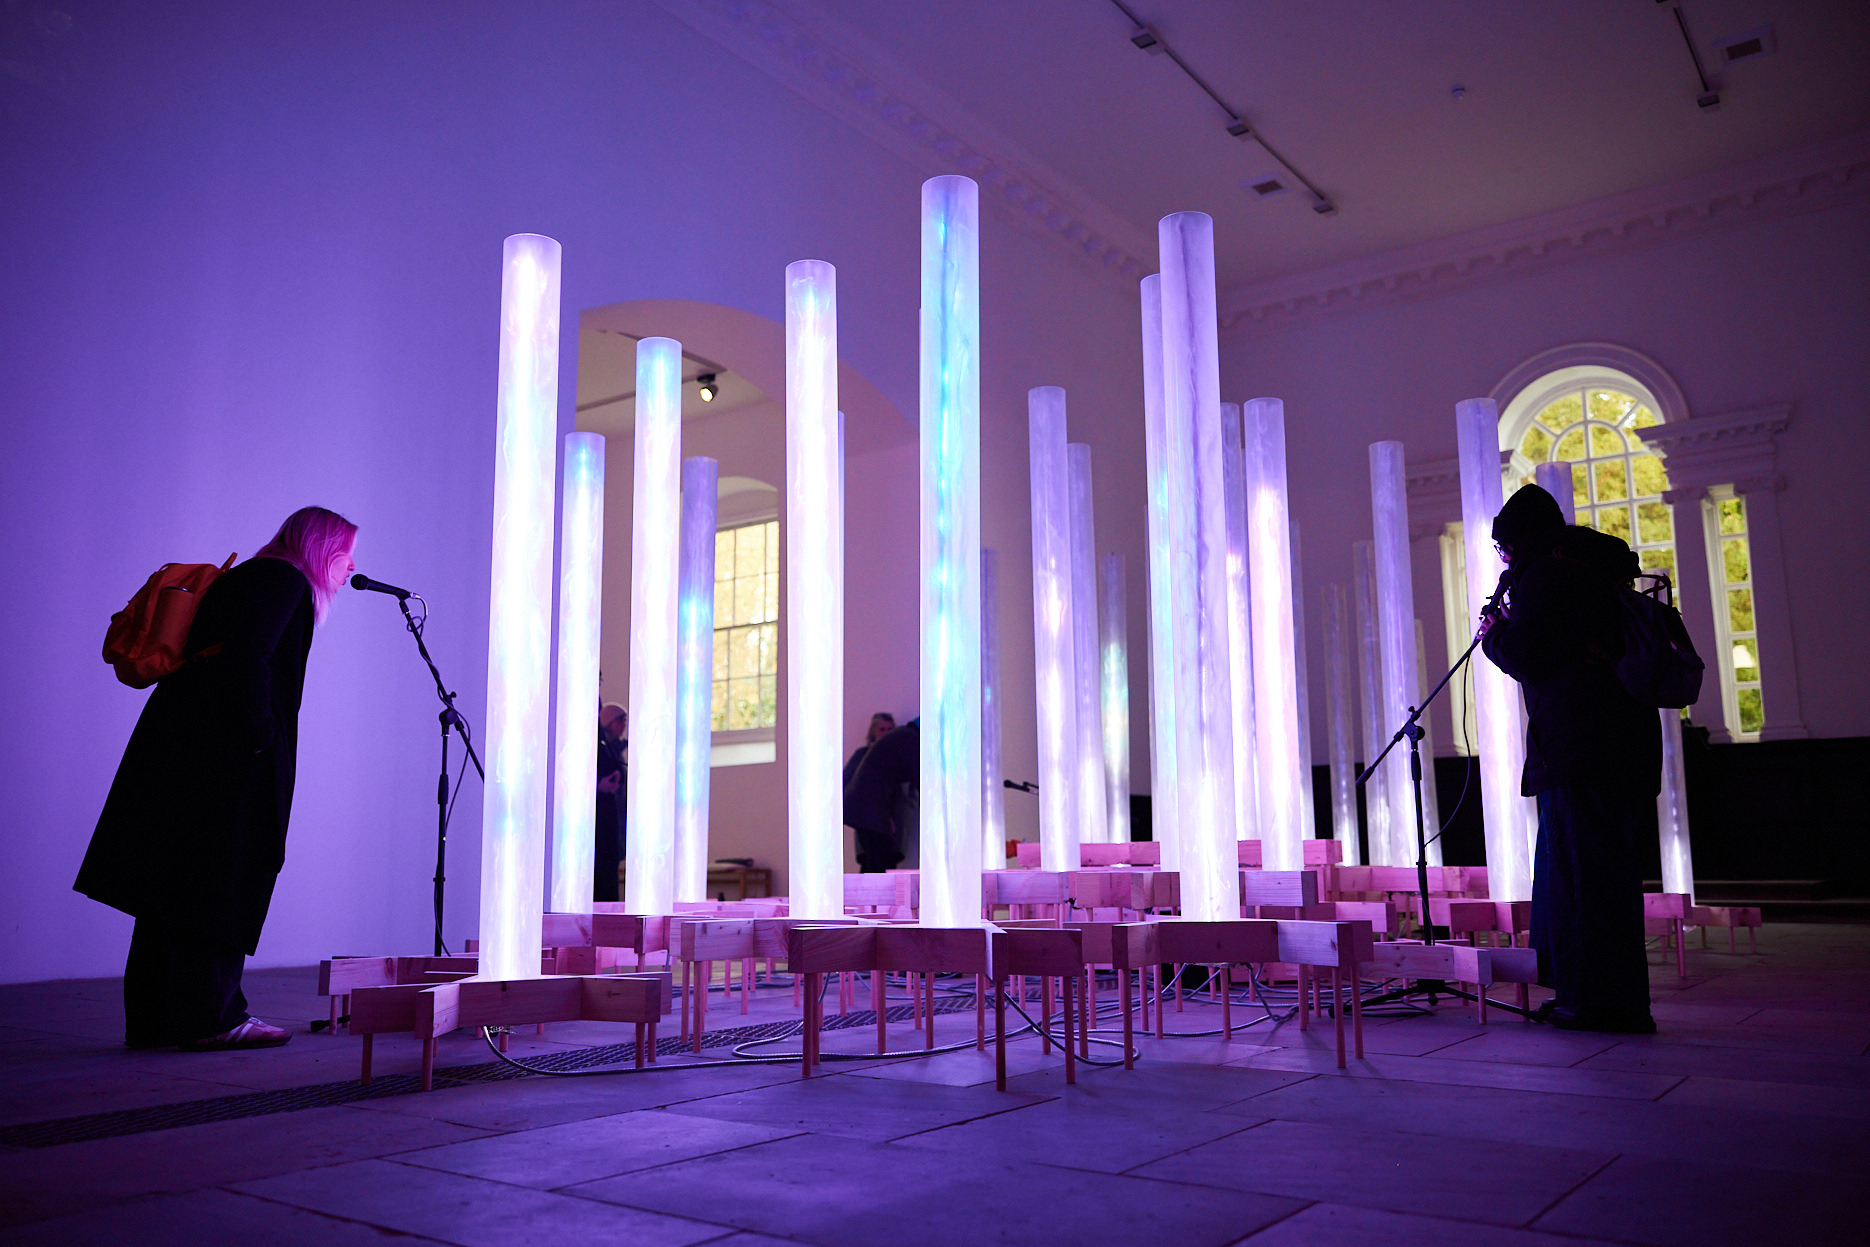 Two adults singing into microphones surrounded by glowing columns.